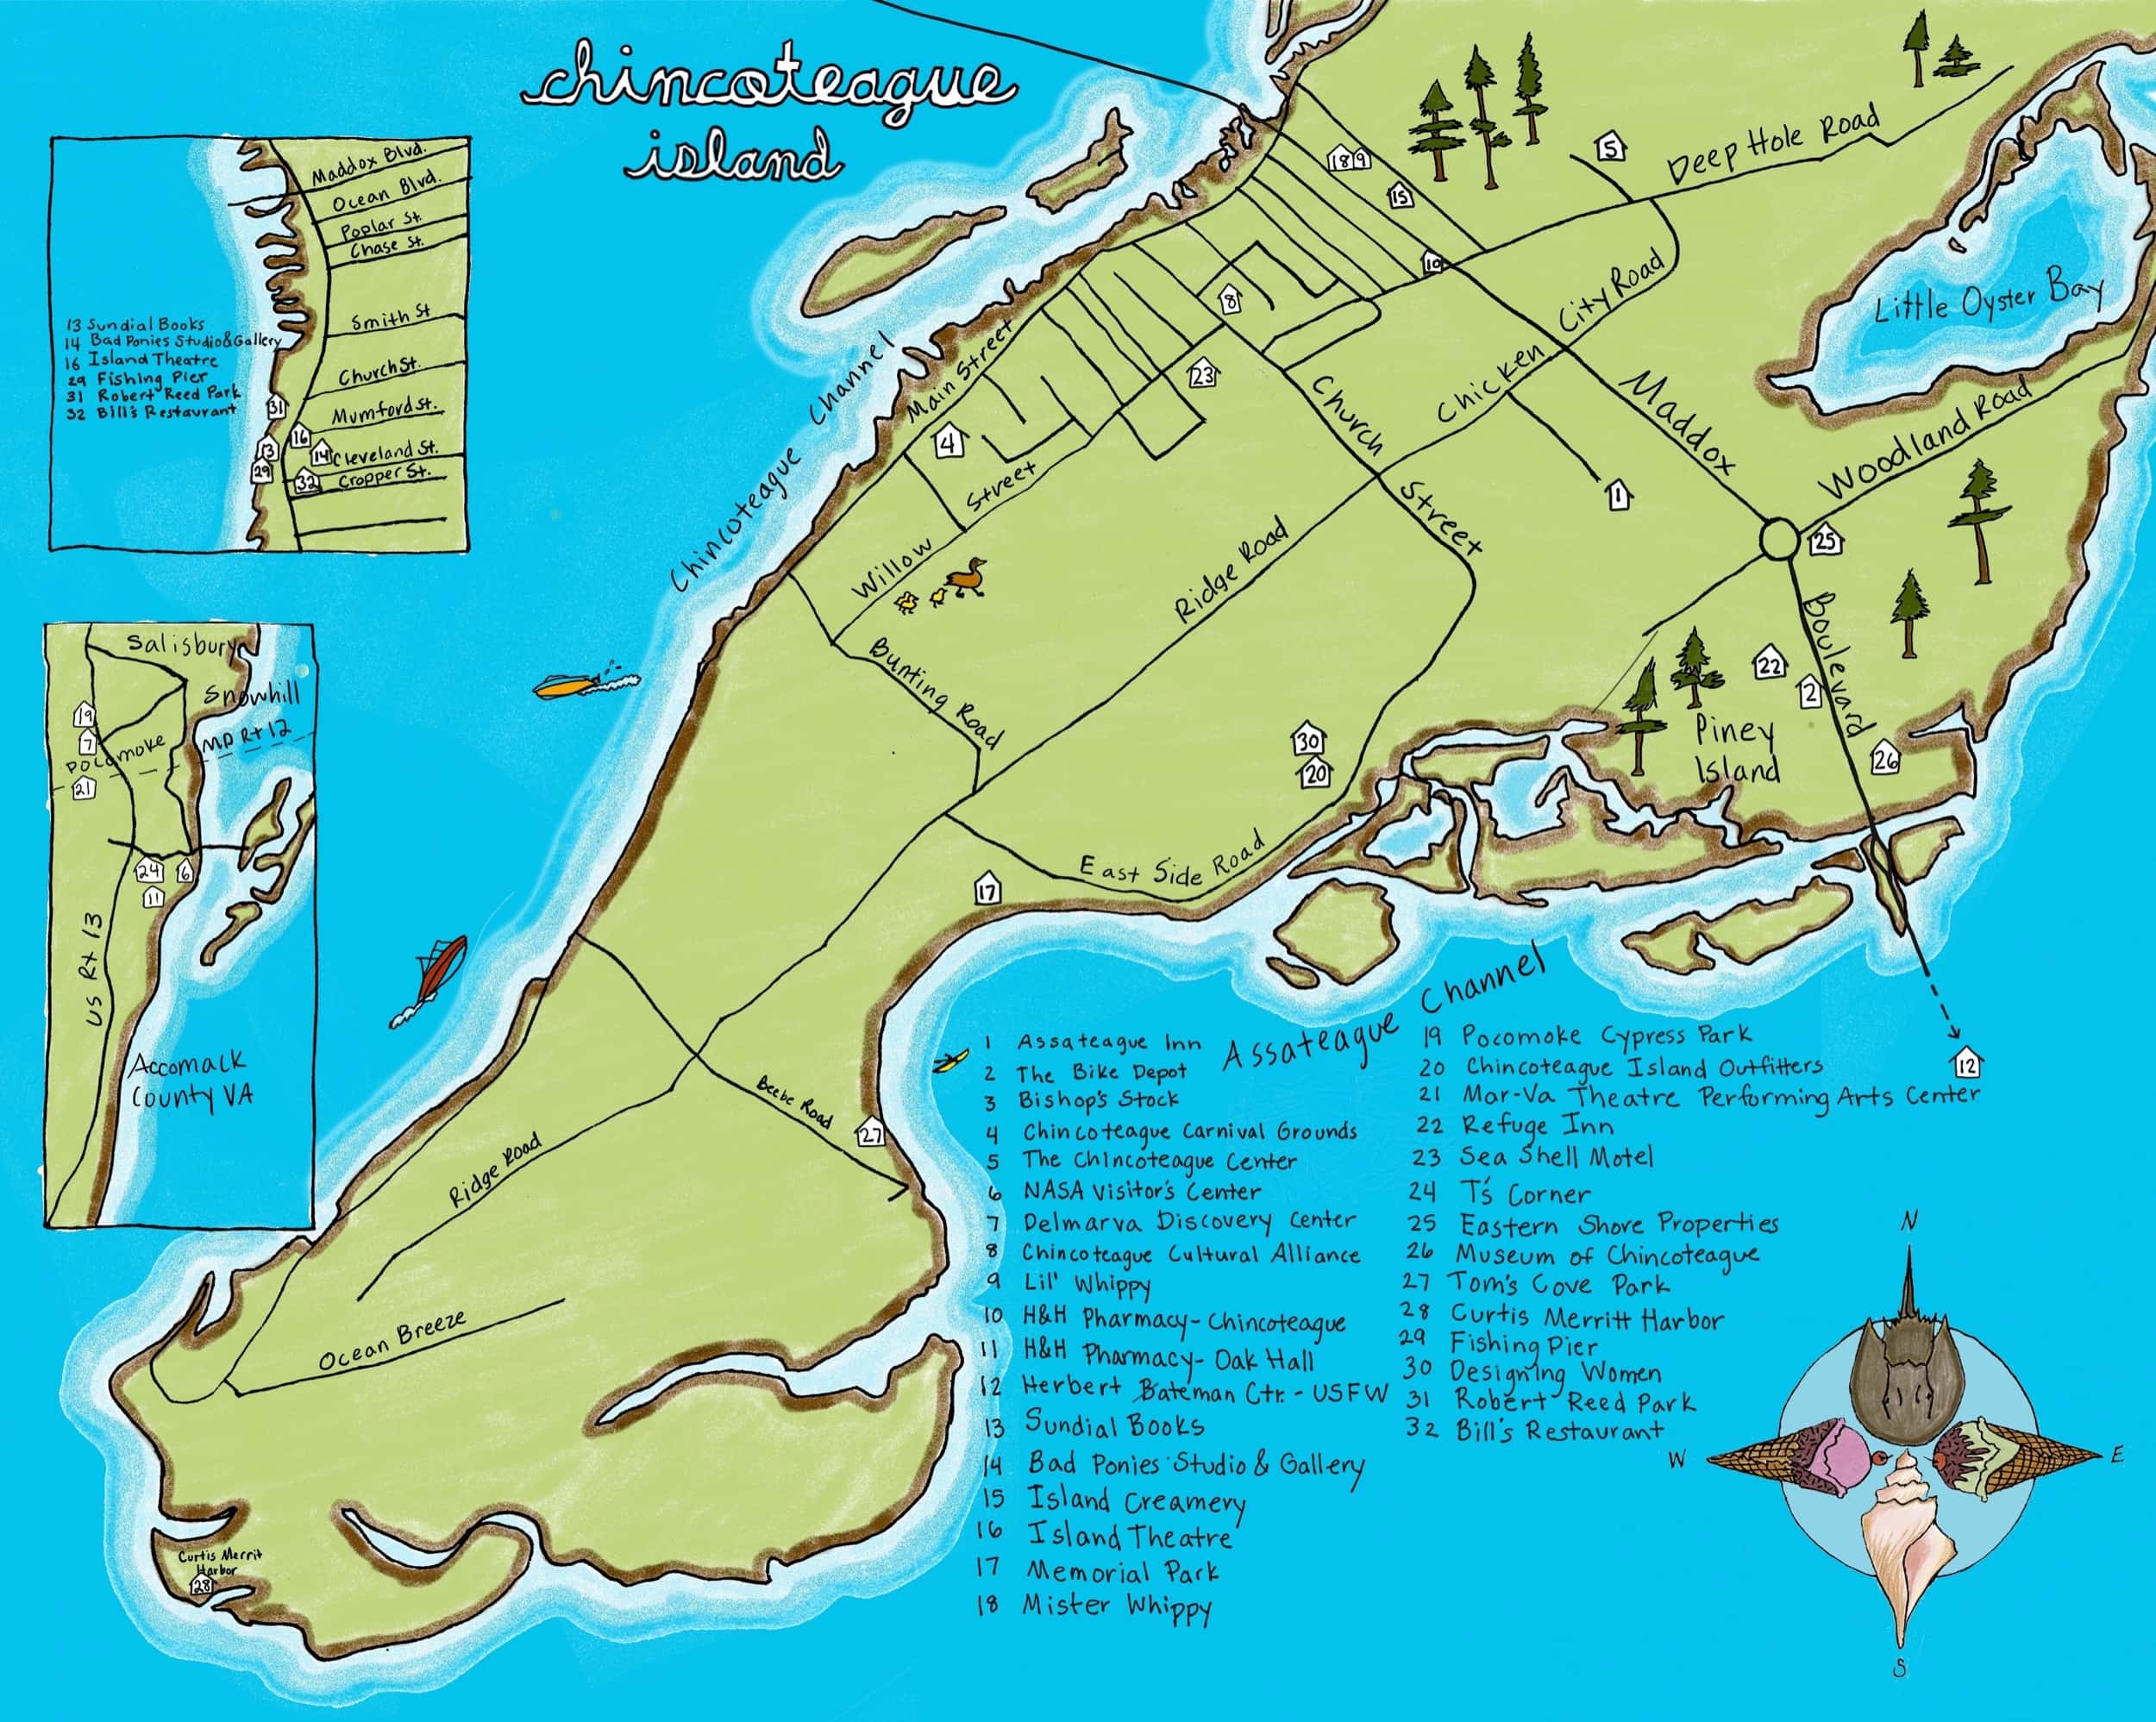 Chincoteague map hand-drawn and colored by Joanna King.